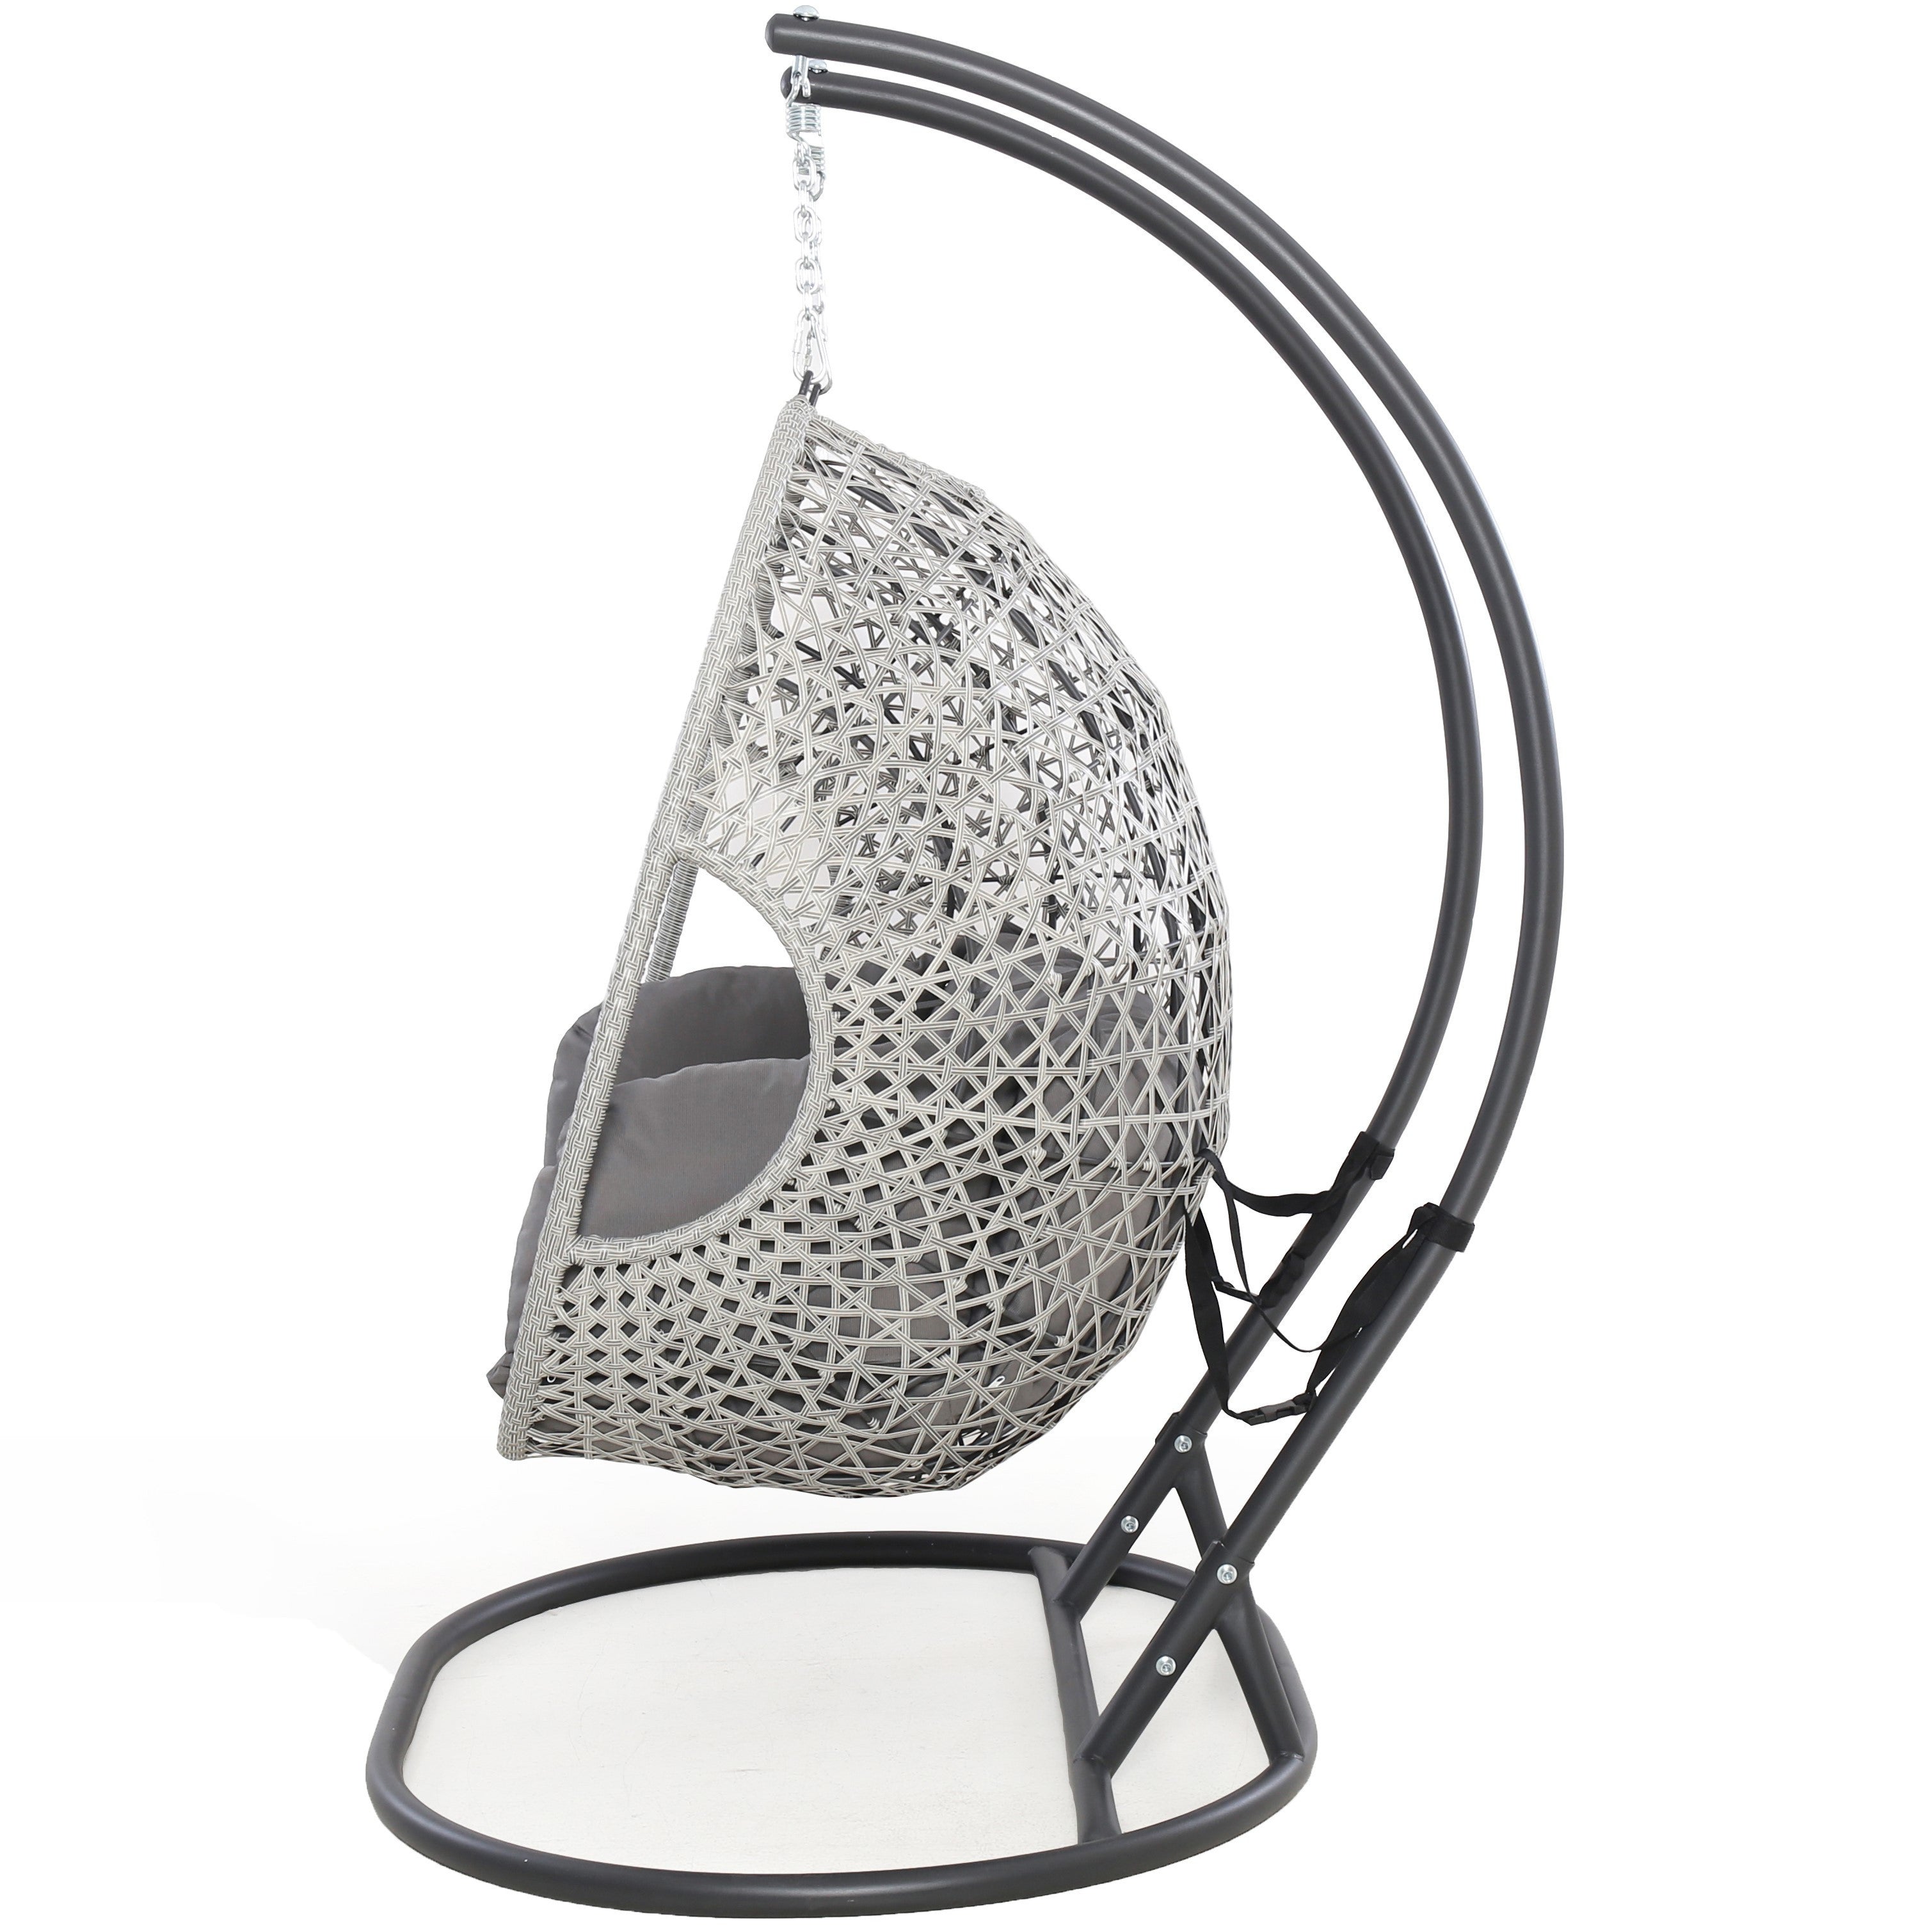 Ascot Rattan Outdoor Double Hanging Egg Chair